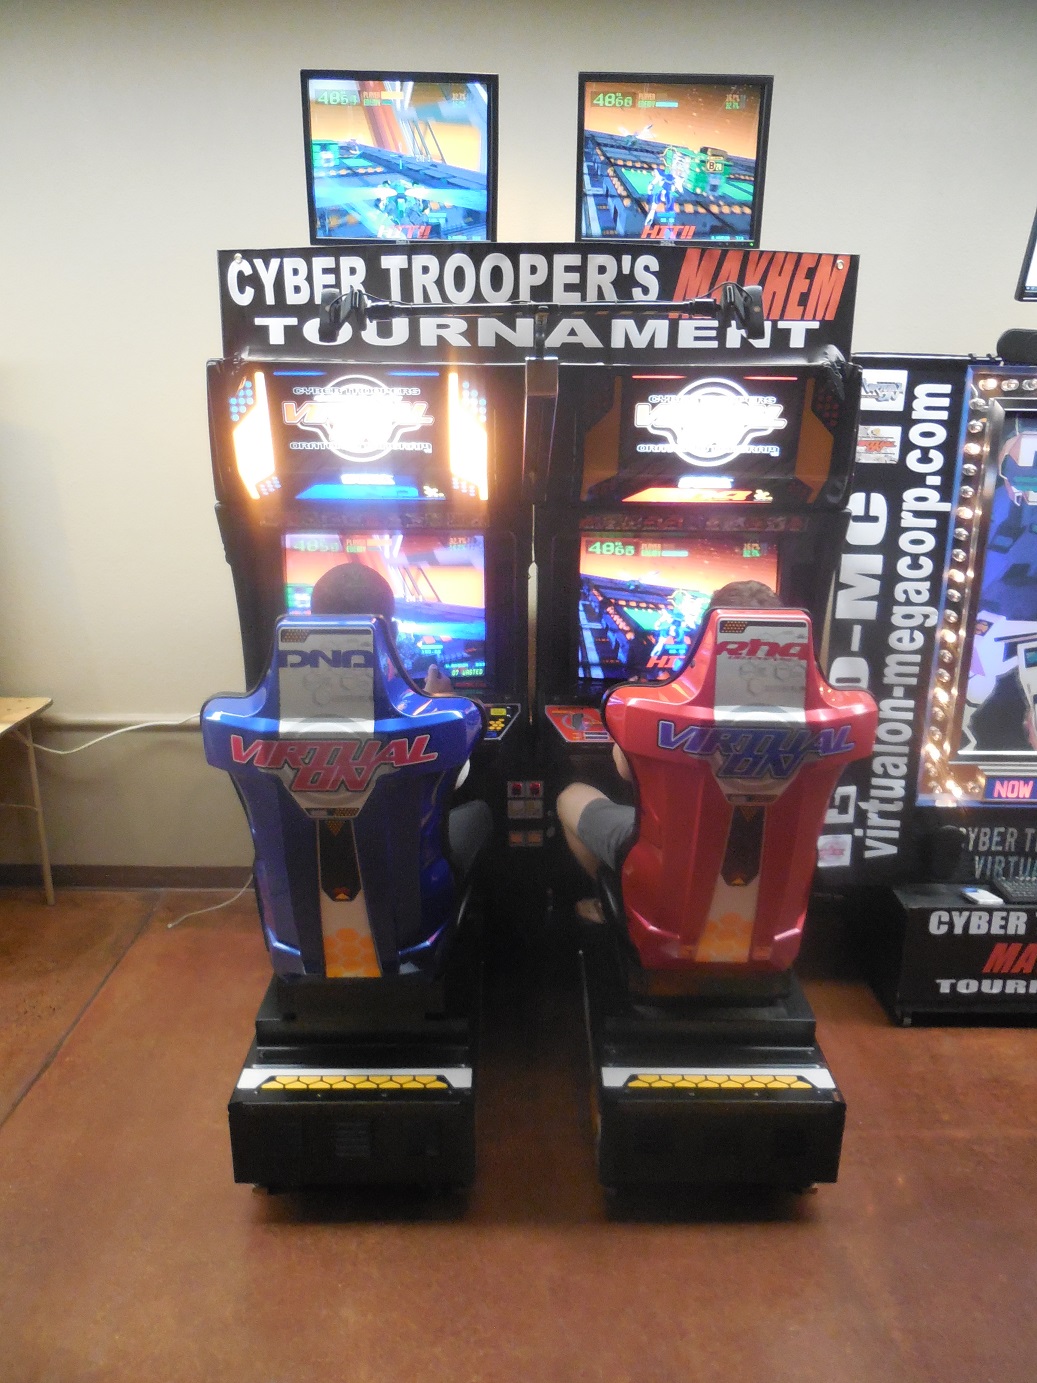 There were an amazing number of tournaments all weekend, too, and folks flocked to different parts of the convention center all weekend to play. Here's the Cyber Troopers set up. Folks loved this game! 